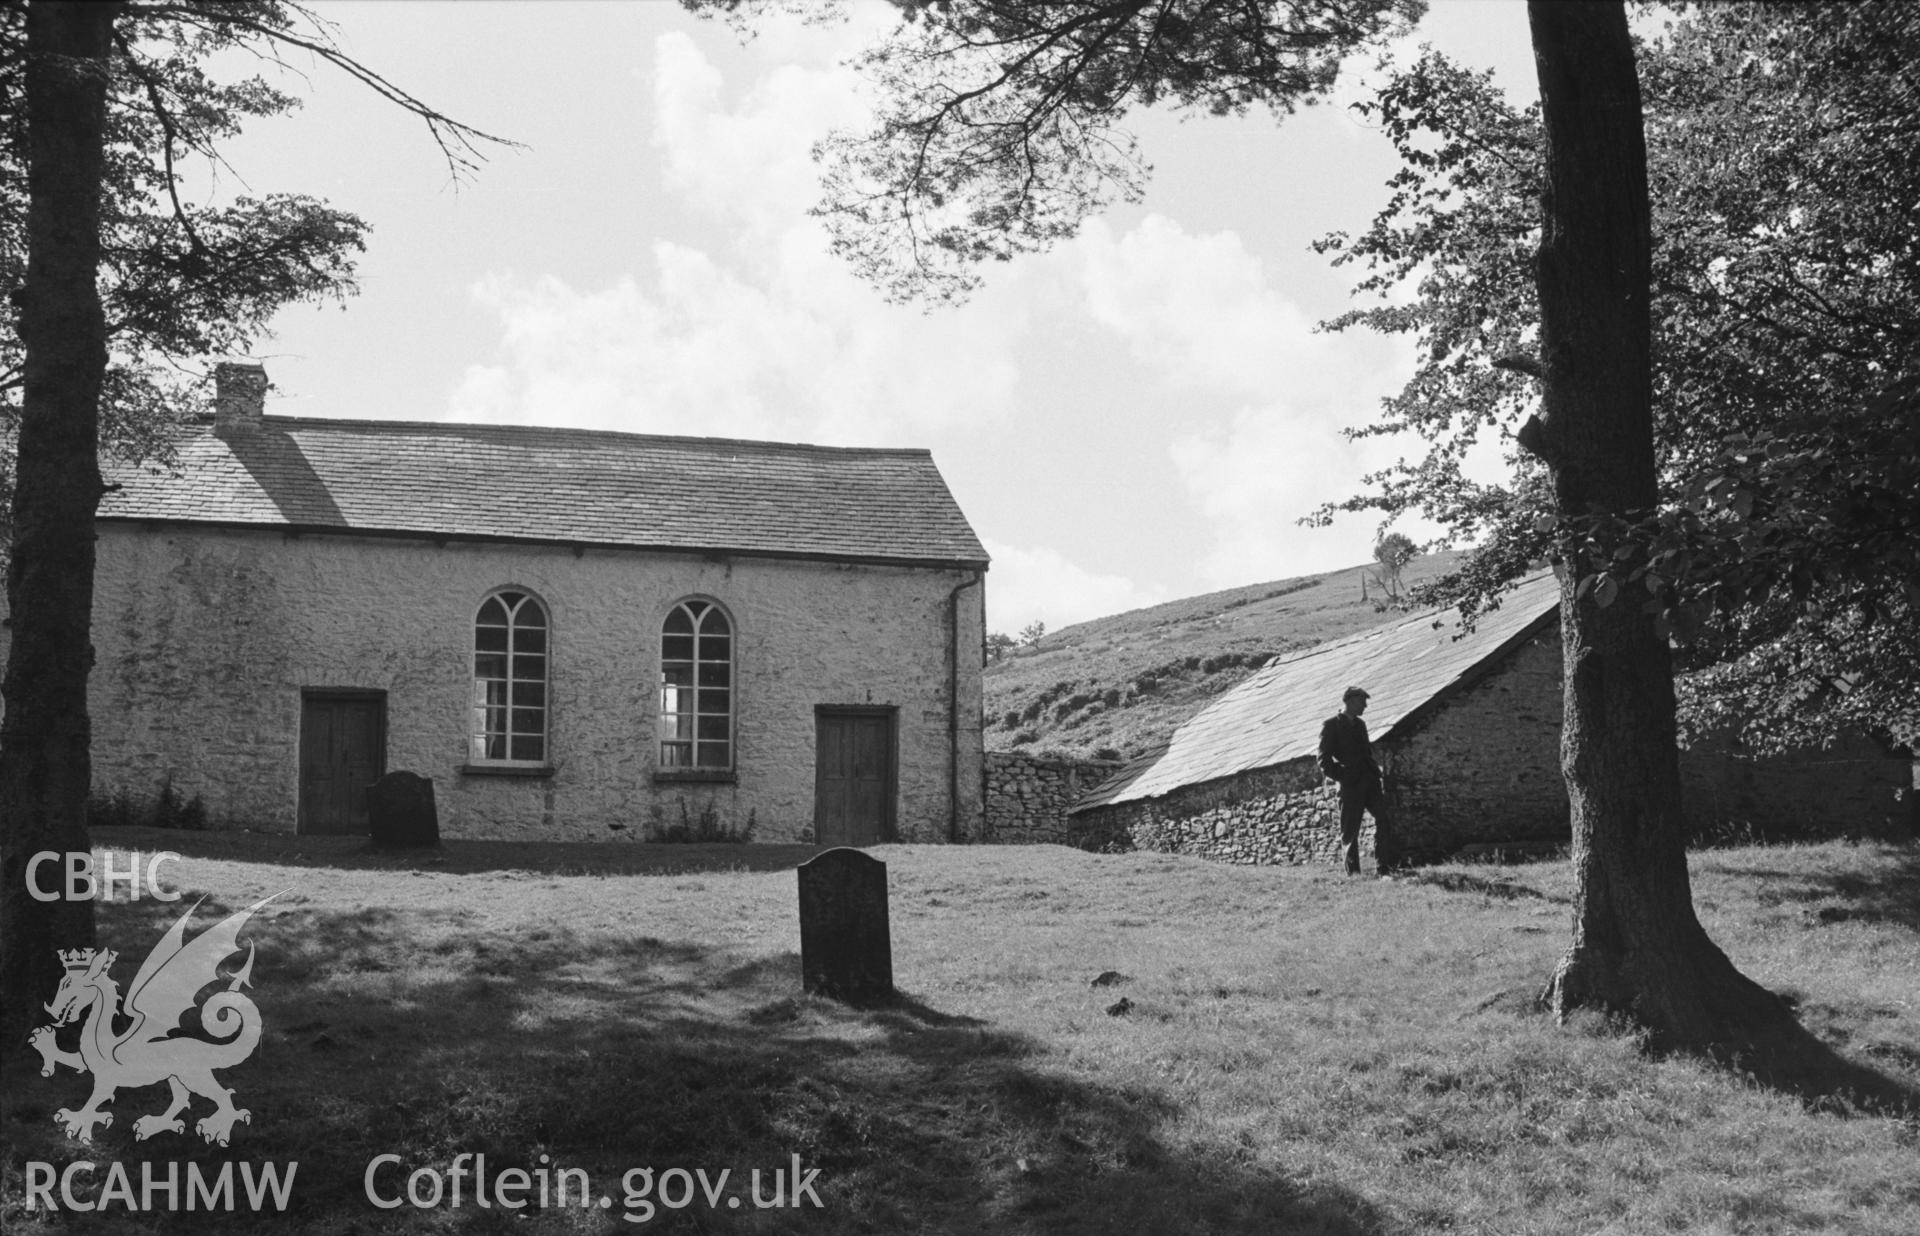 Digital copy of a black and white negative showing exterior front elevation of Soar-y-Mynydd, Llanddewi Brefi. Photographed in September 1963 by Arthur O. Chater from the graveyard at Grid Reference SN 7850 5328, looking west south west.